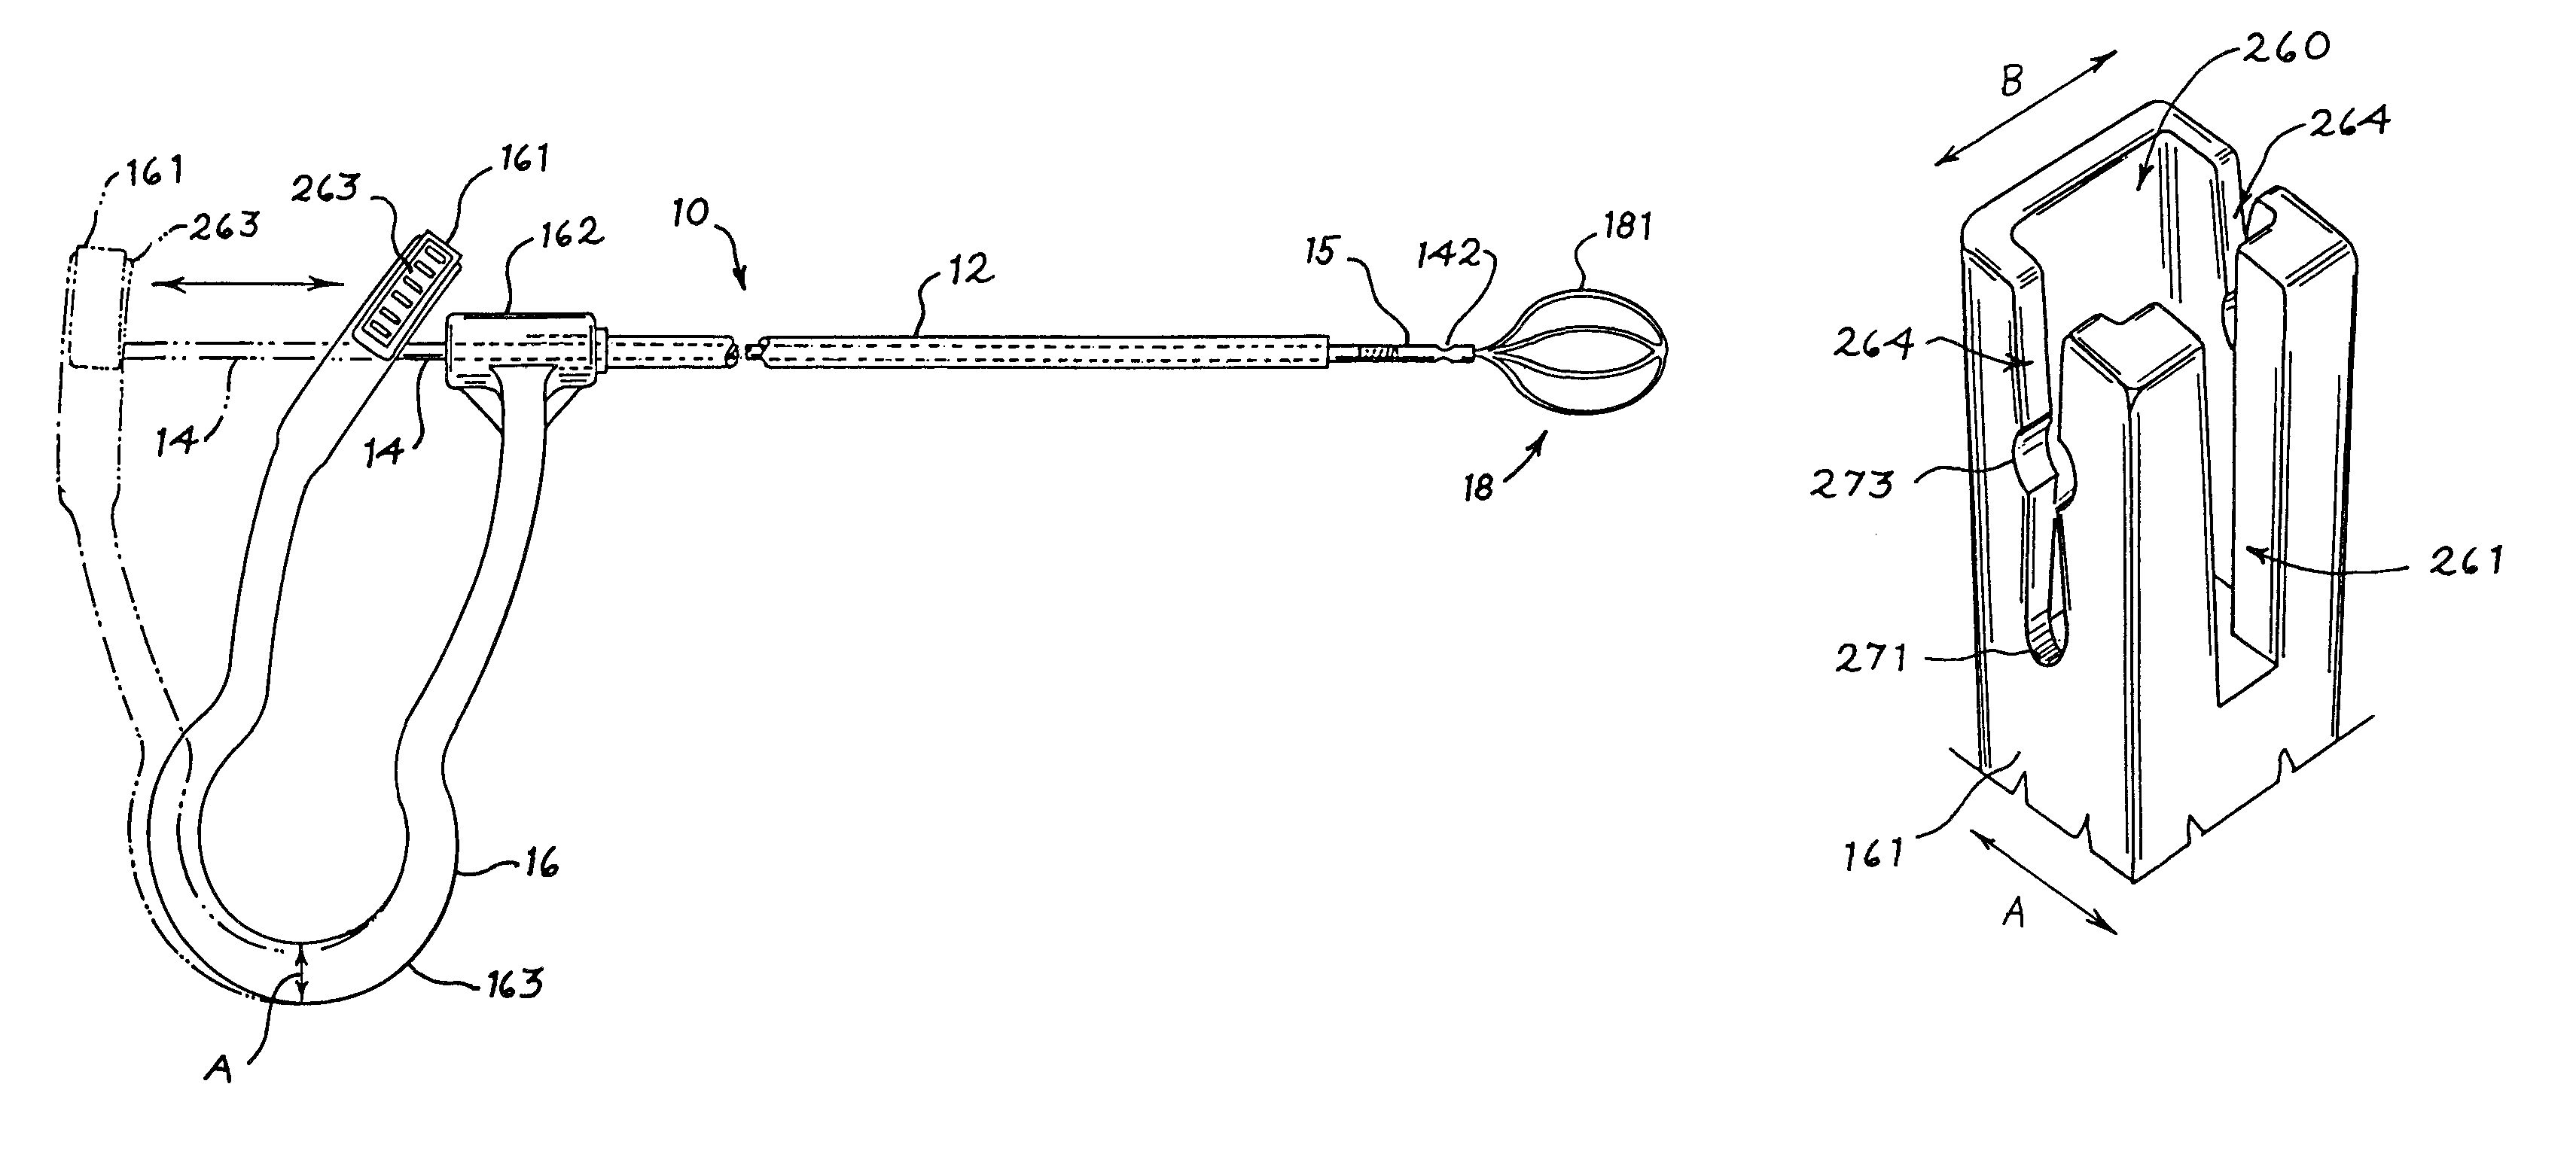 Handle for interchangeable medical device